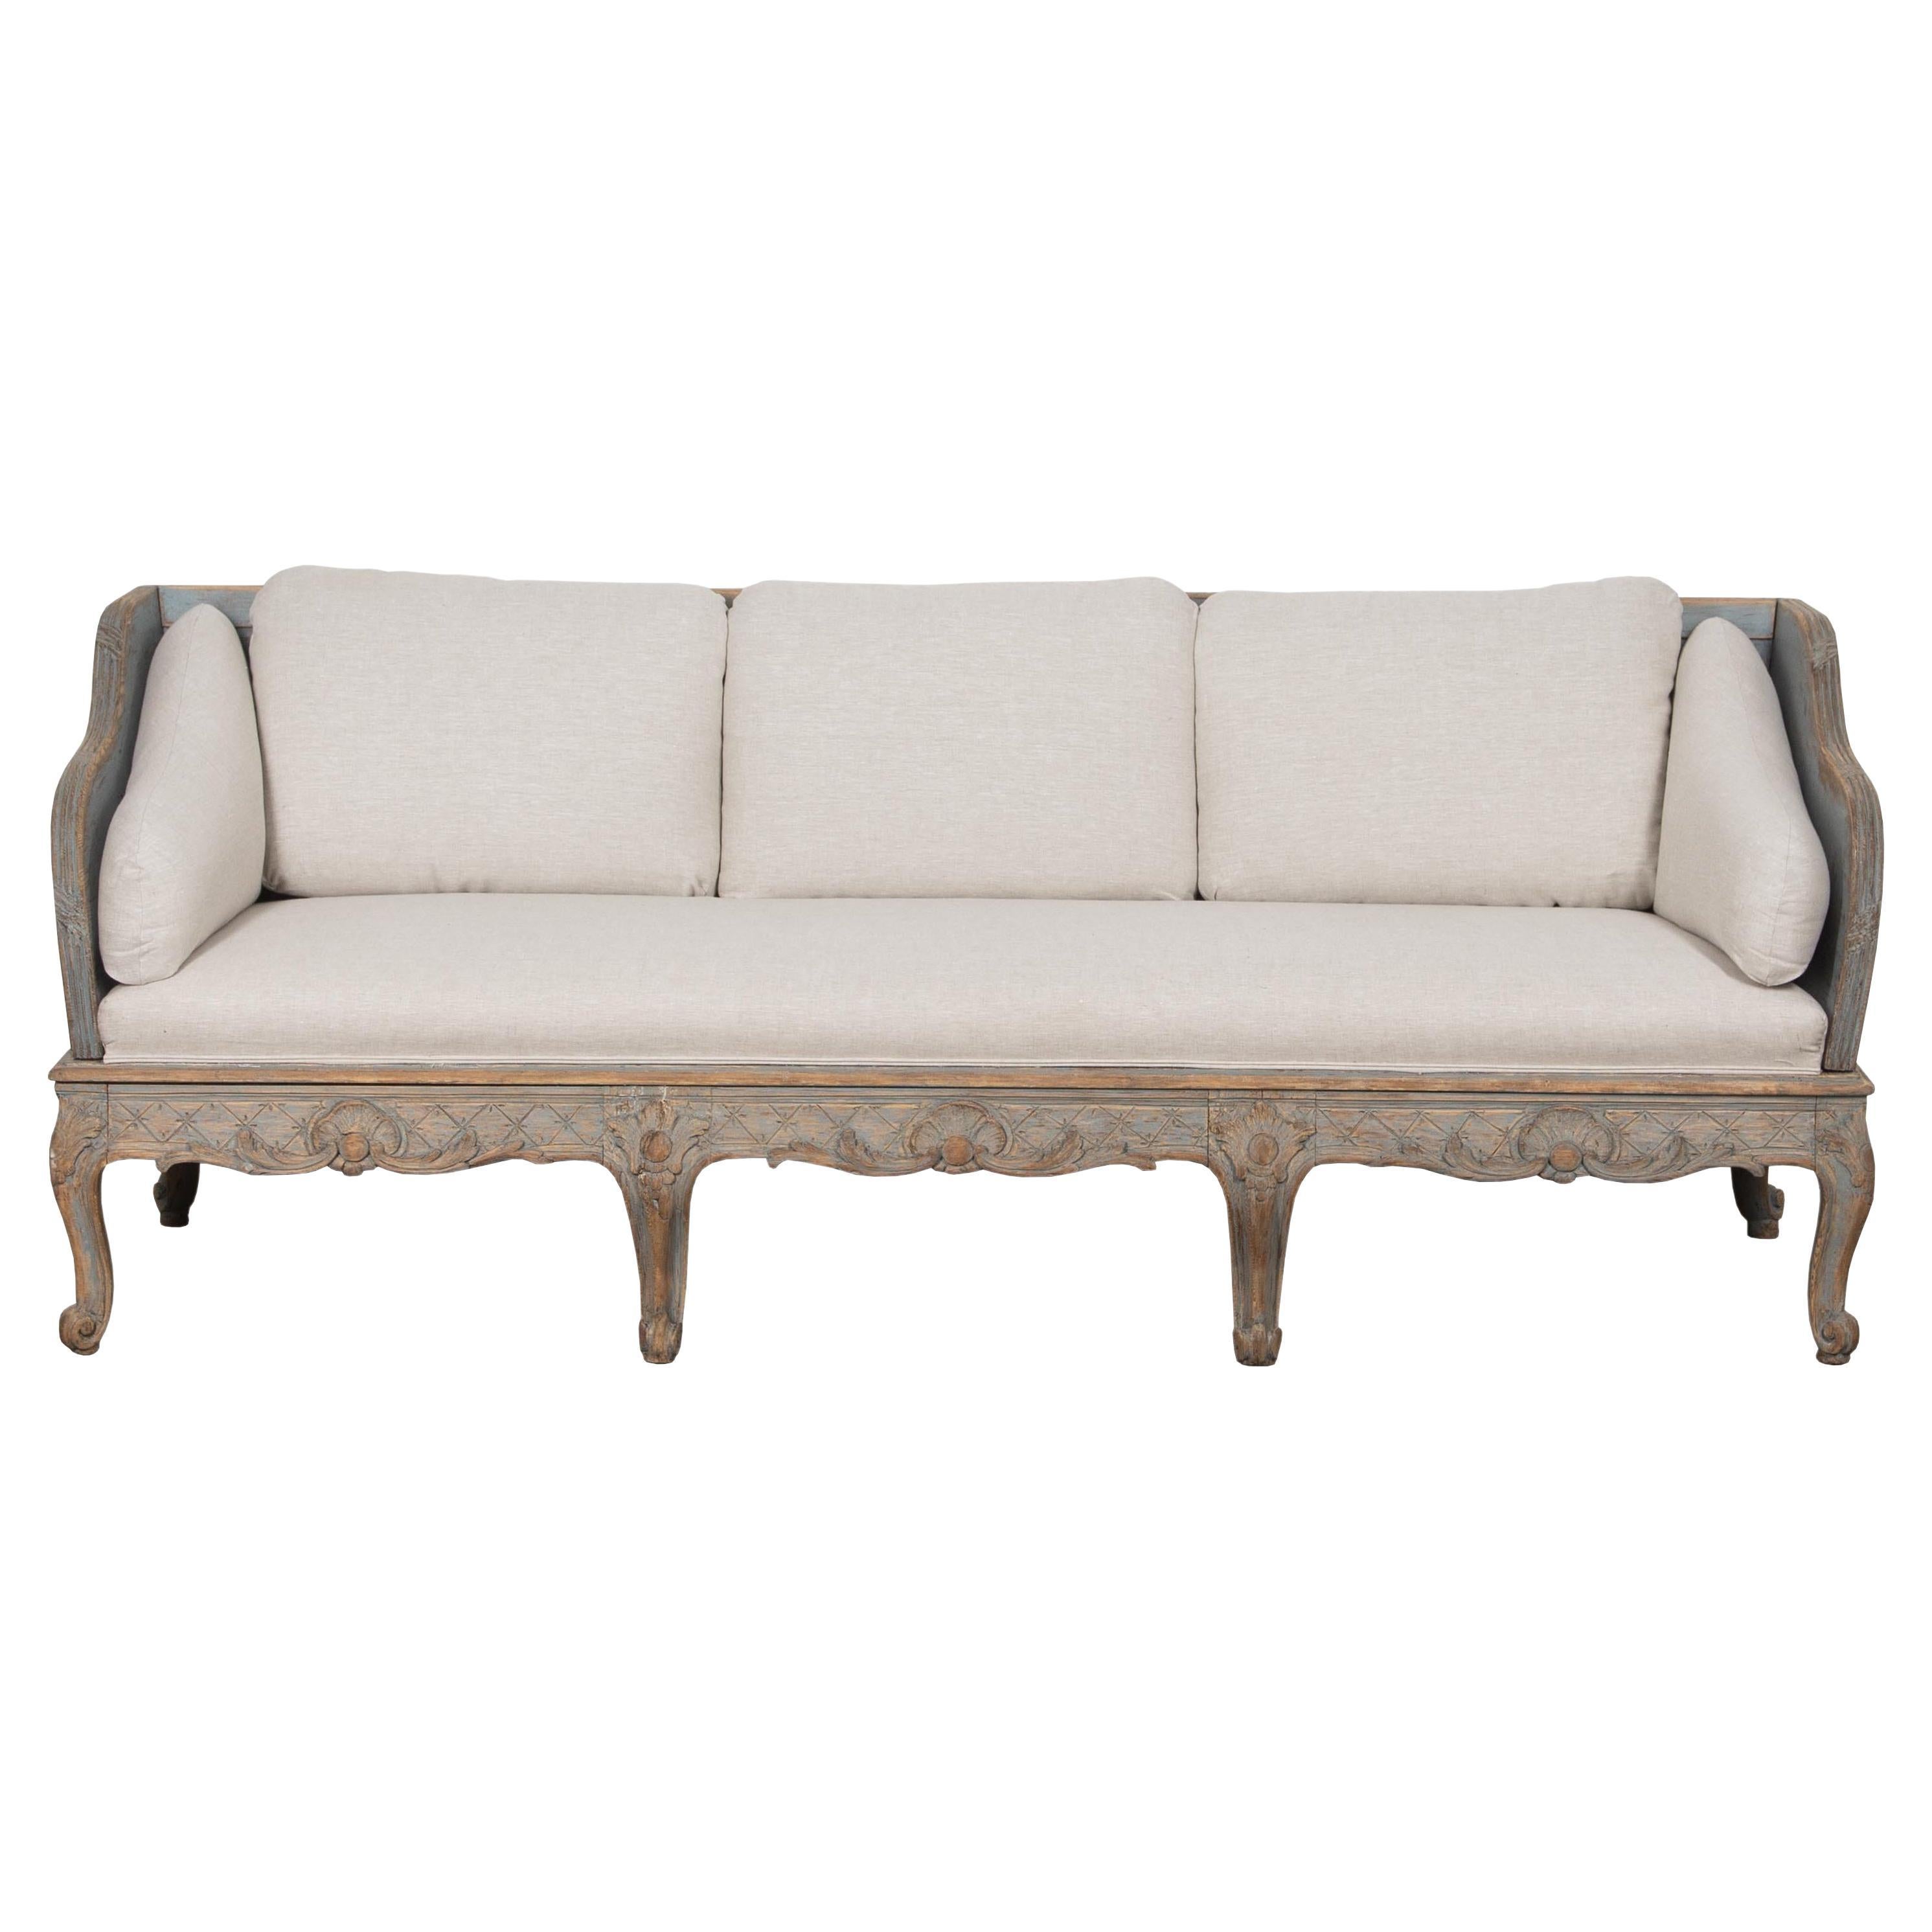 Period Rococo Sofa from Stockholm For Sale